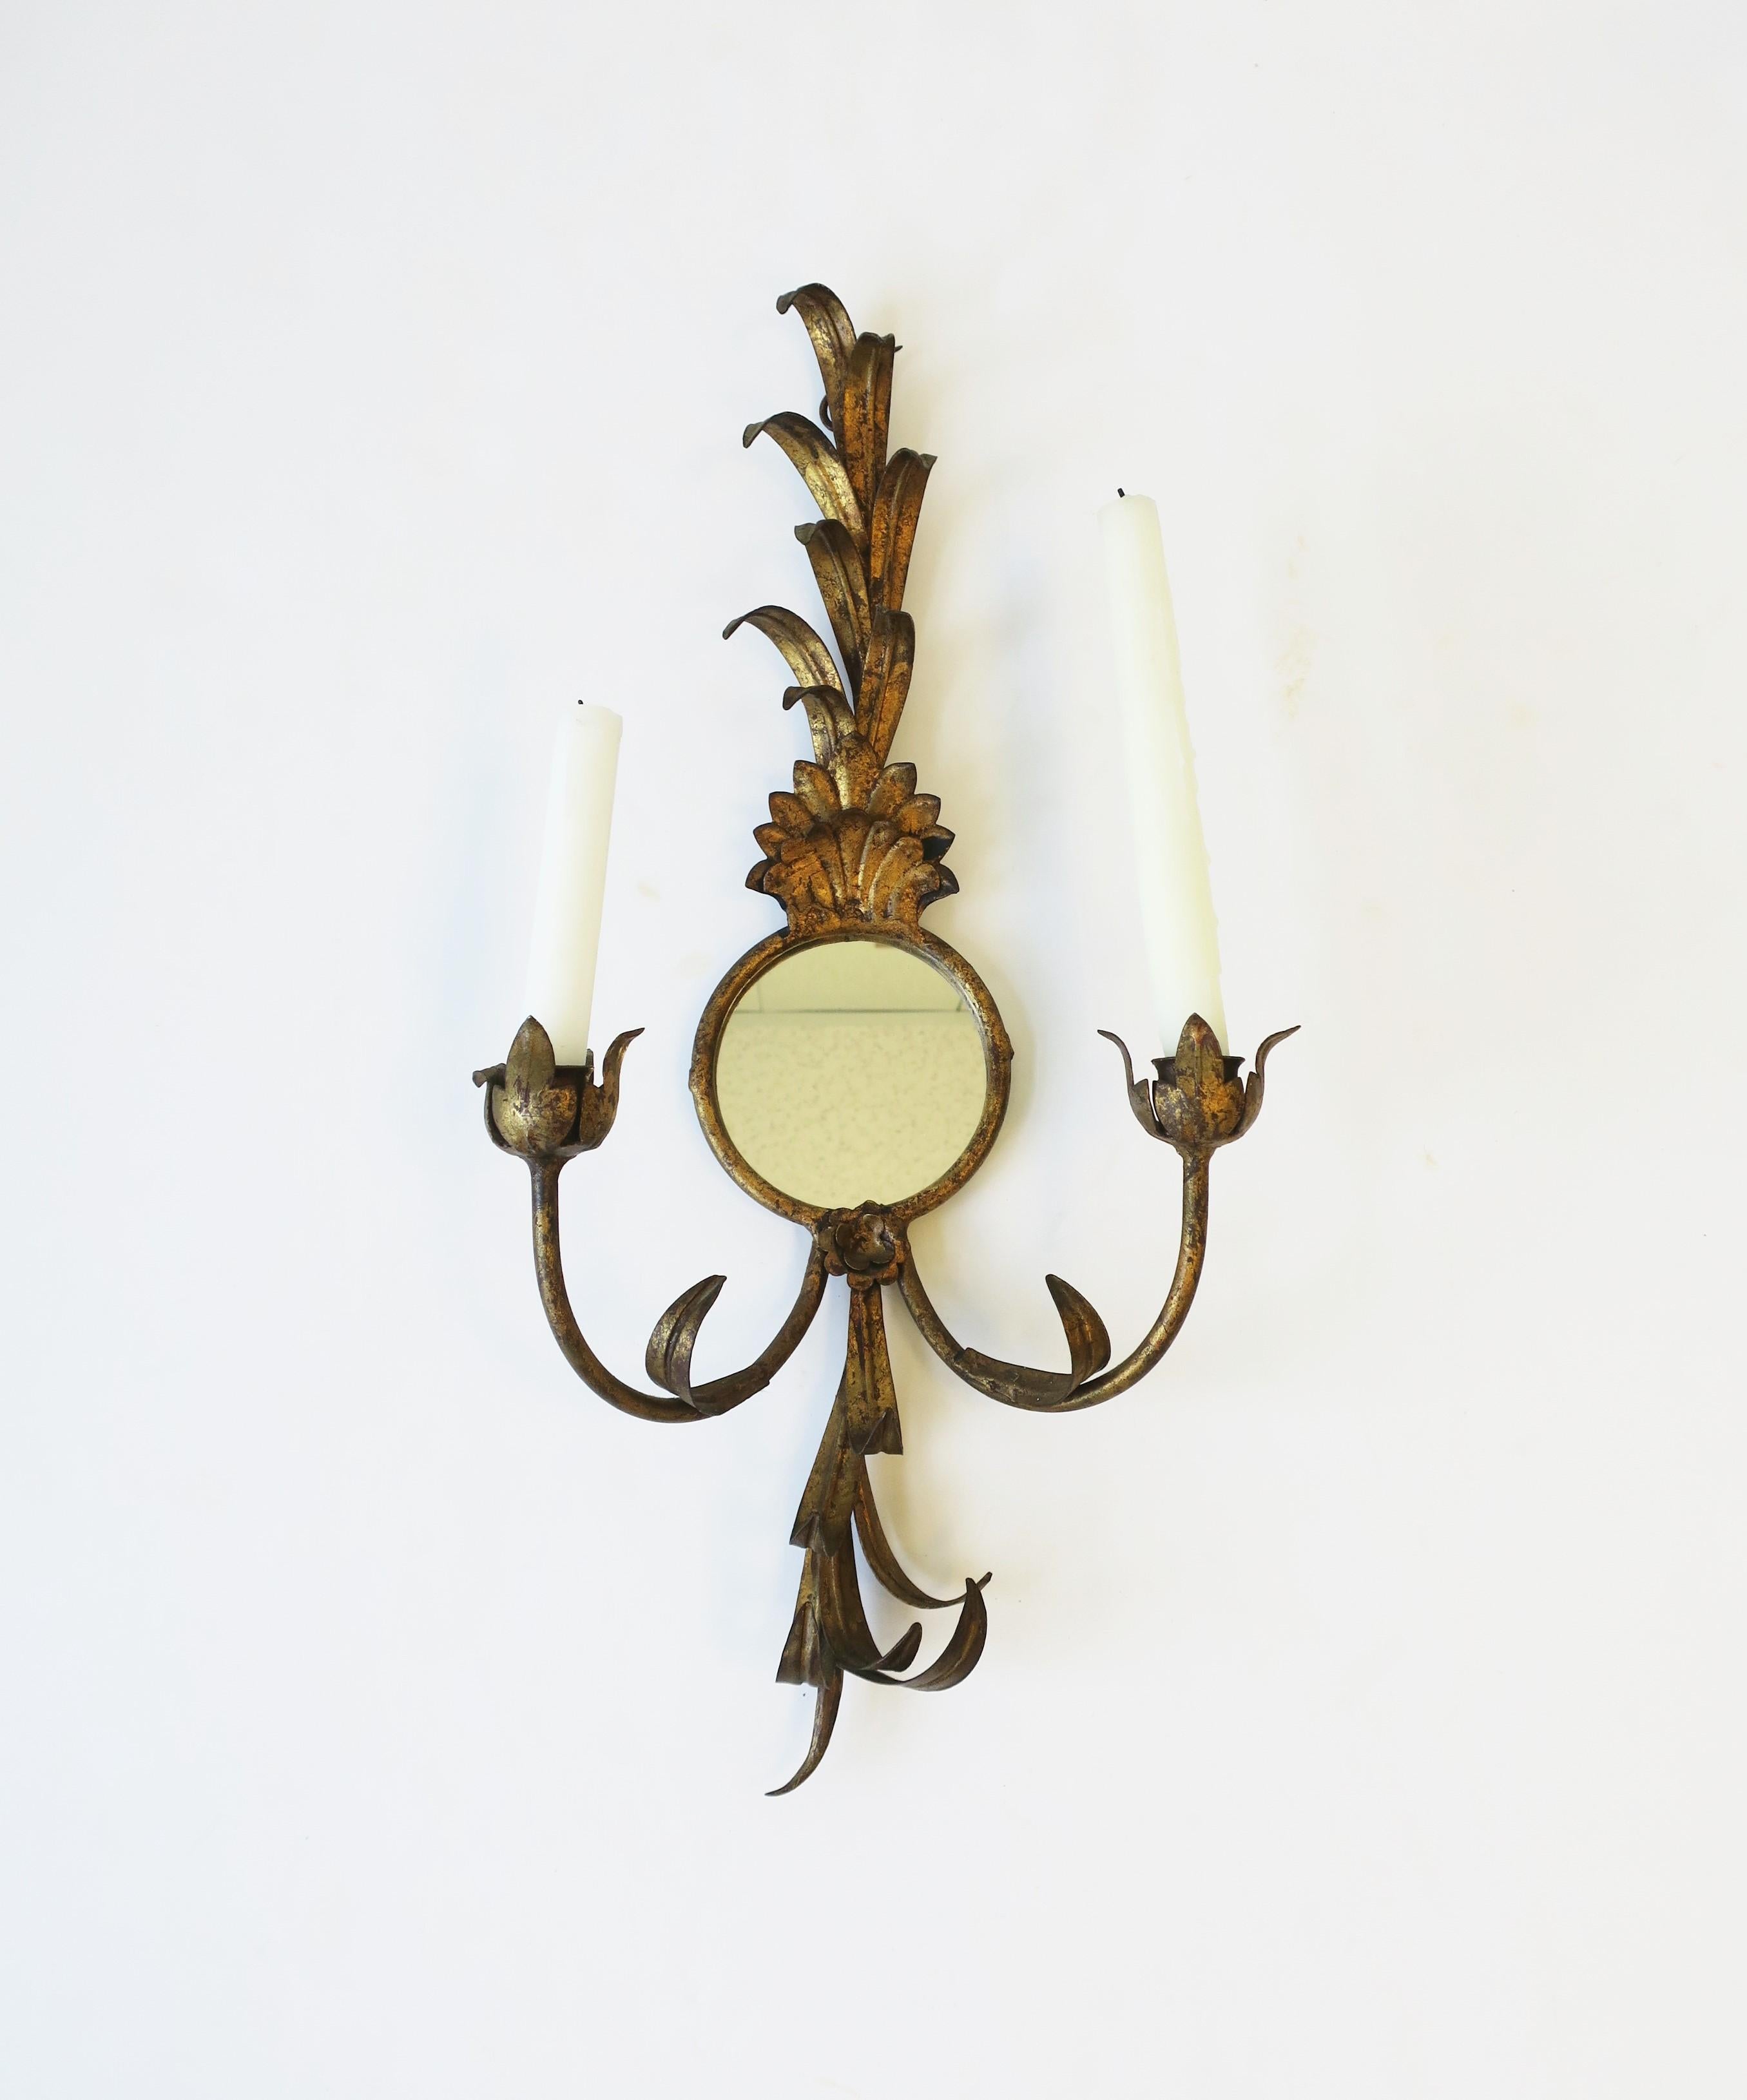 A gold gilt tole metal and mirror sheaf-of-wheat candle wall sconce, circa early-21st century. Holds two candles as demonstrated. Small round mirror at center. Dimensions: 5.25